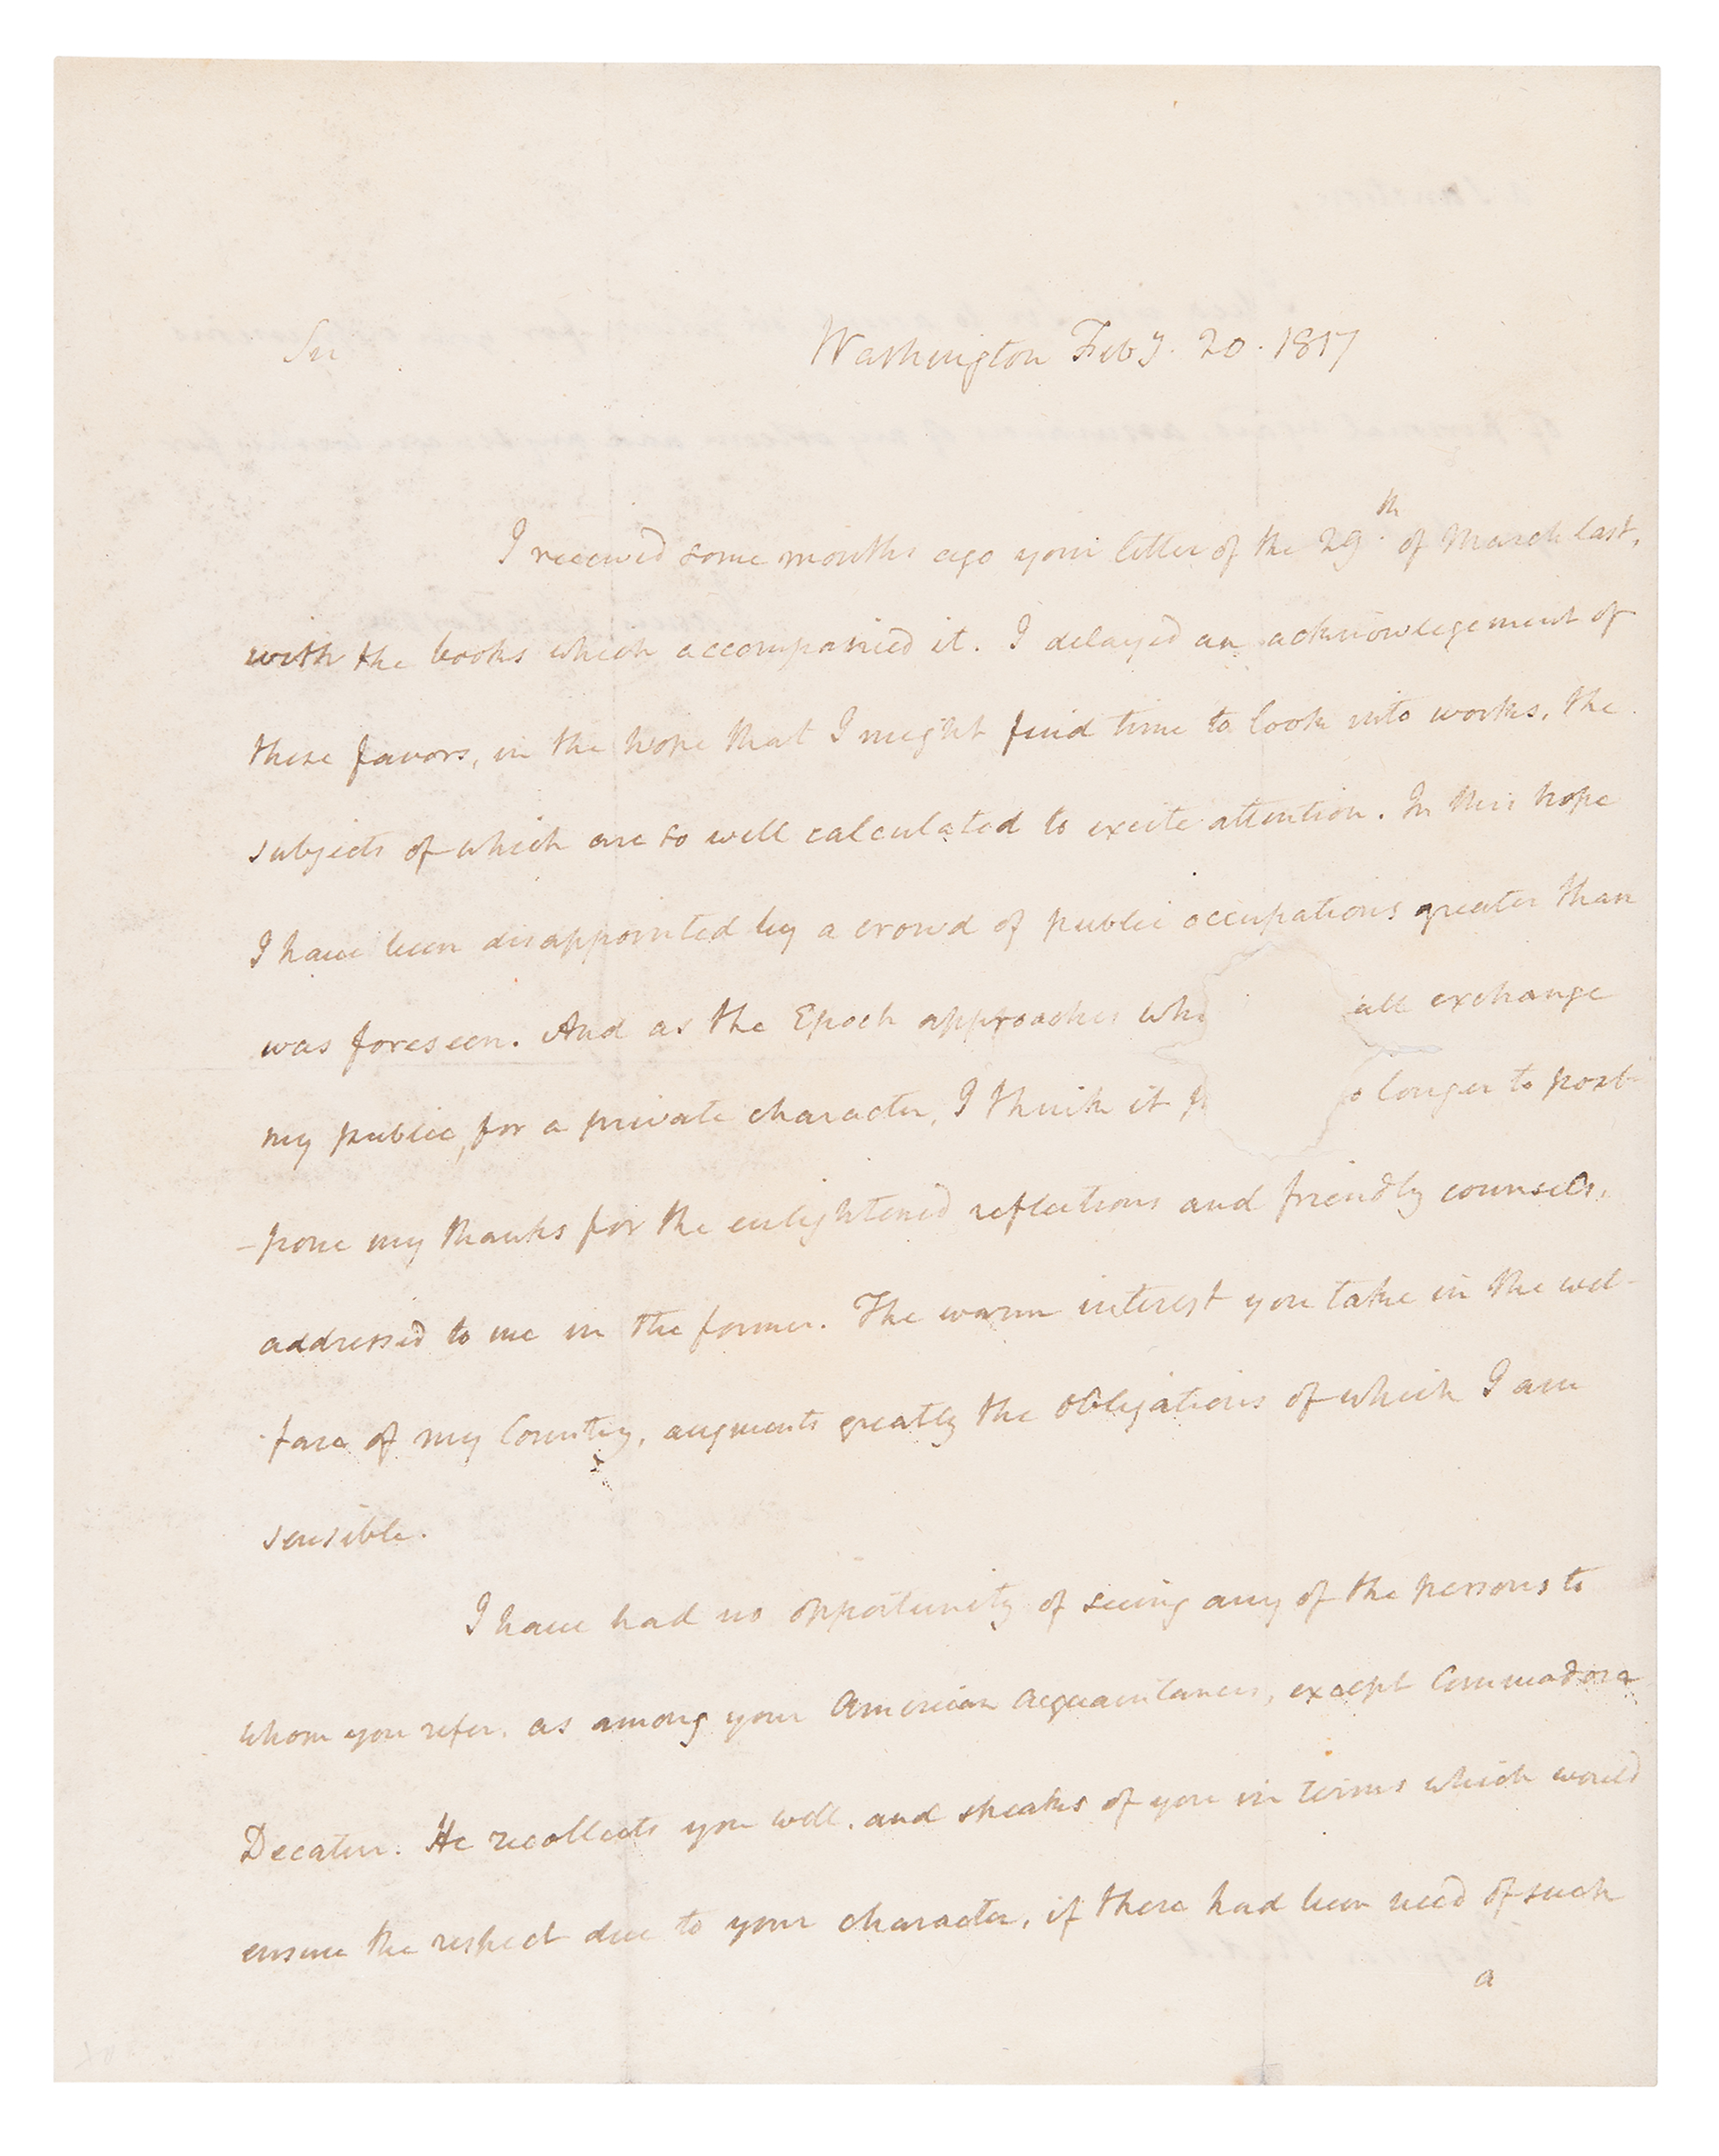 Lot #7 James Madison Autograph Letter Signed as President, Reflecting on the End of His Term and Mentioning Commodore Stephen Decatur - Image 2